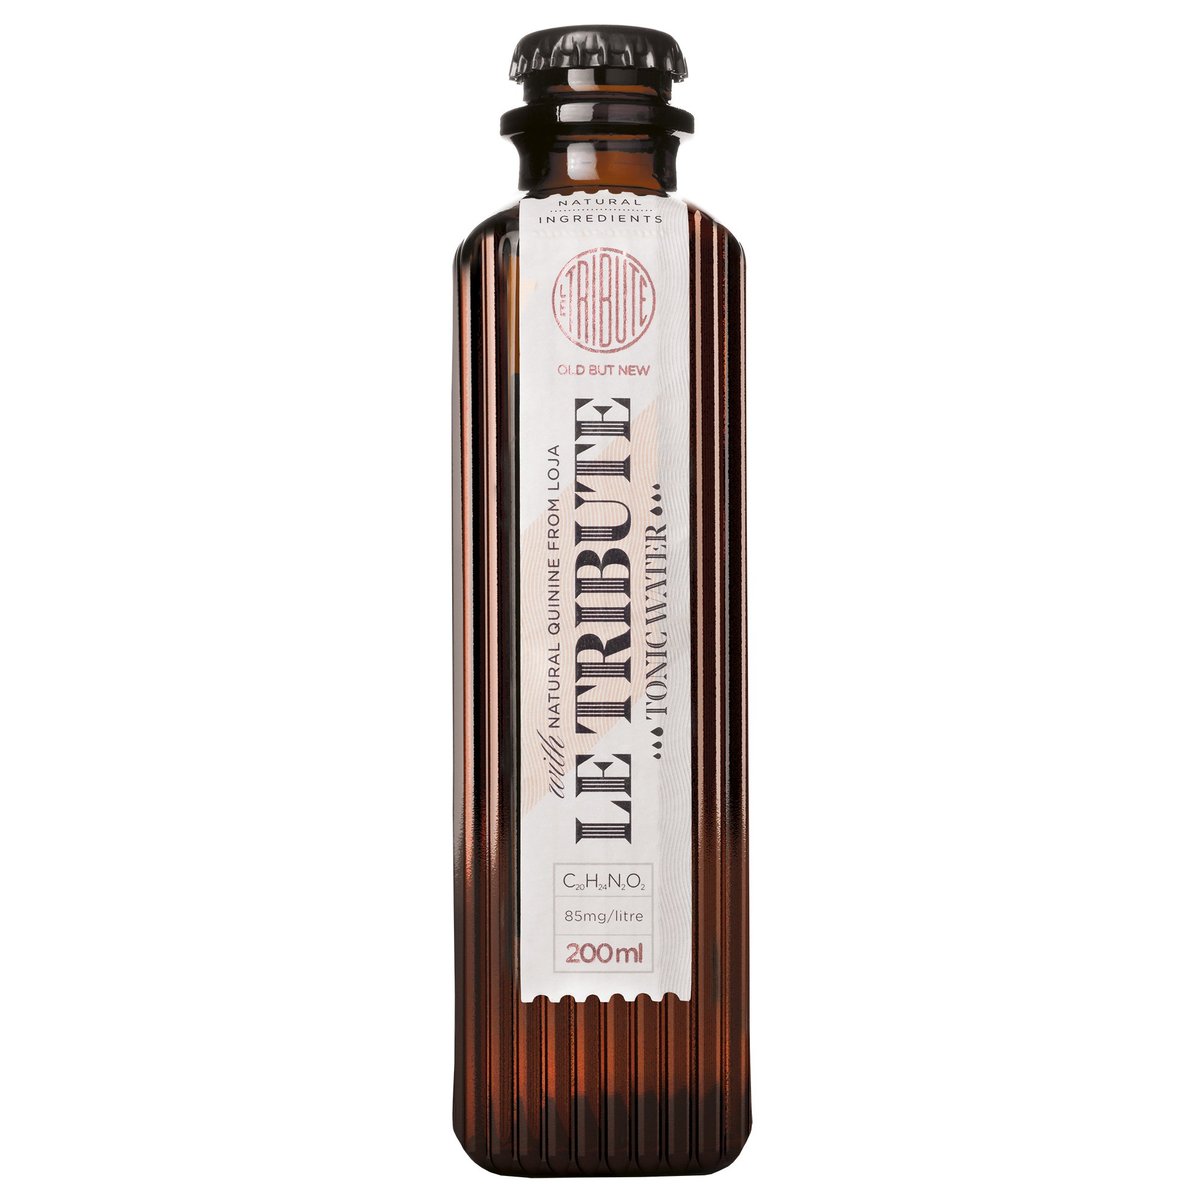 Le Tribute Tonic water